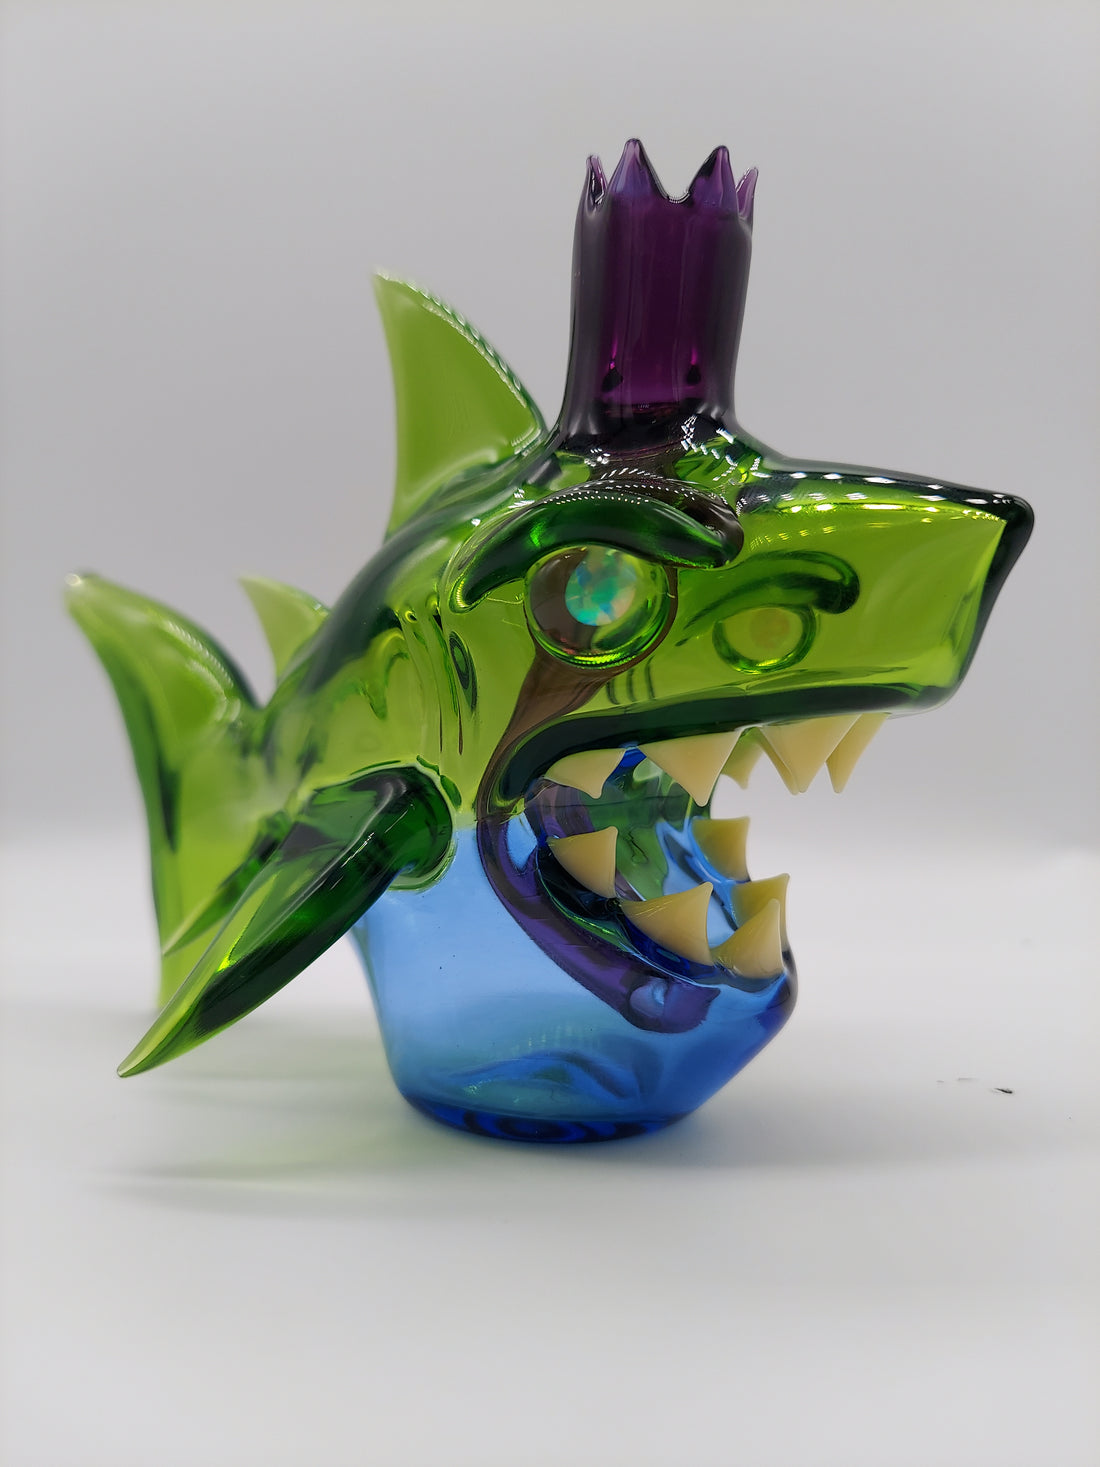 The Art of Glass: A Look into Pipe Dreamz's High-End American Handmade Glass Collection